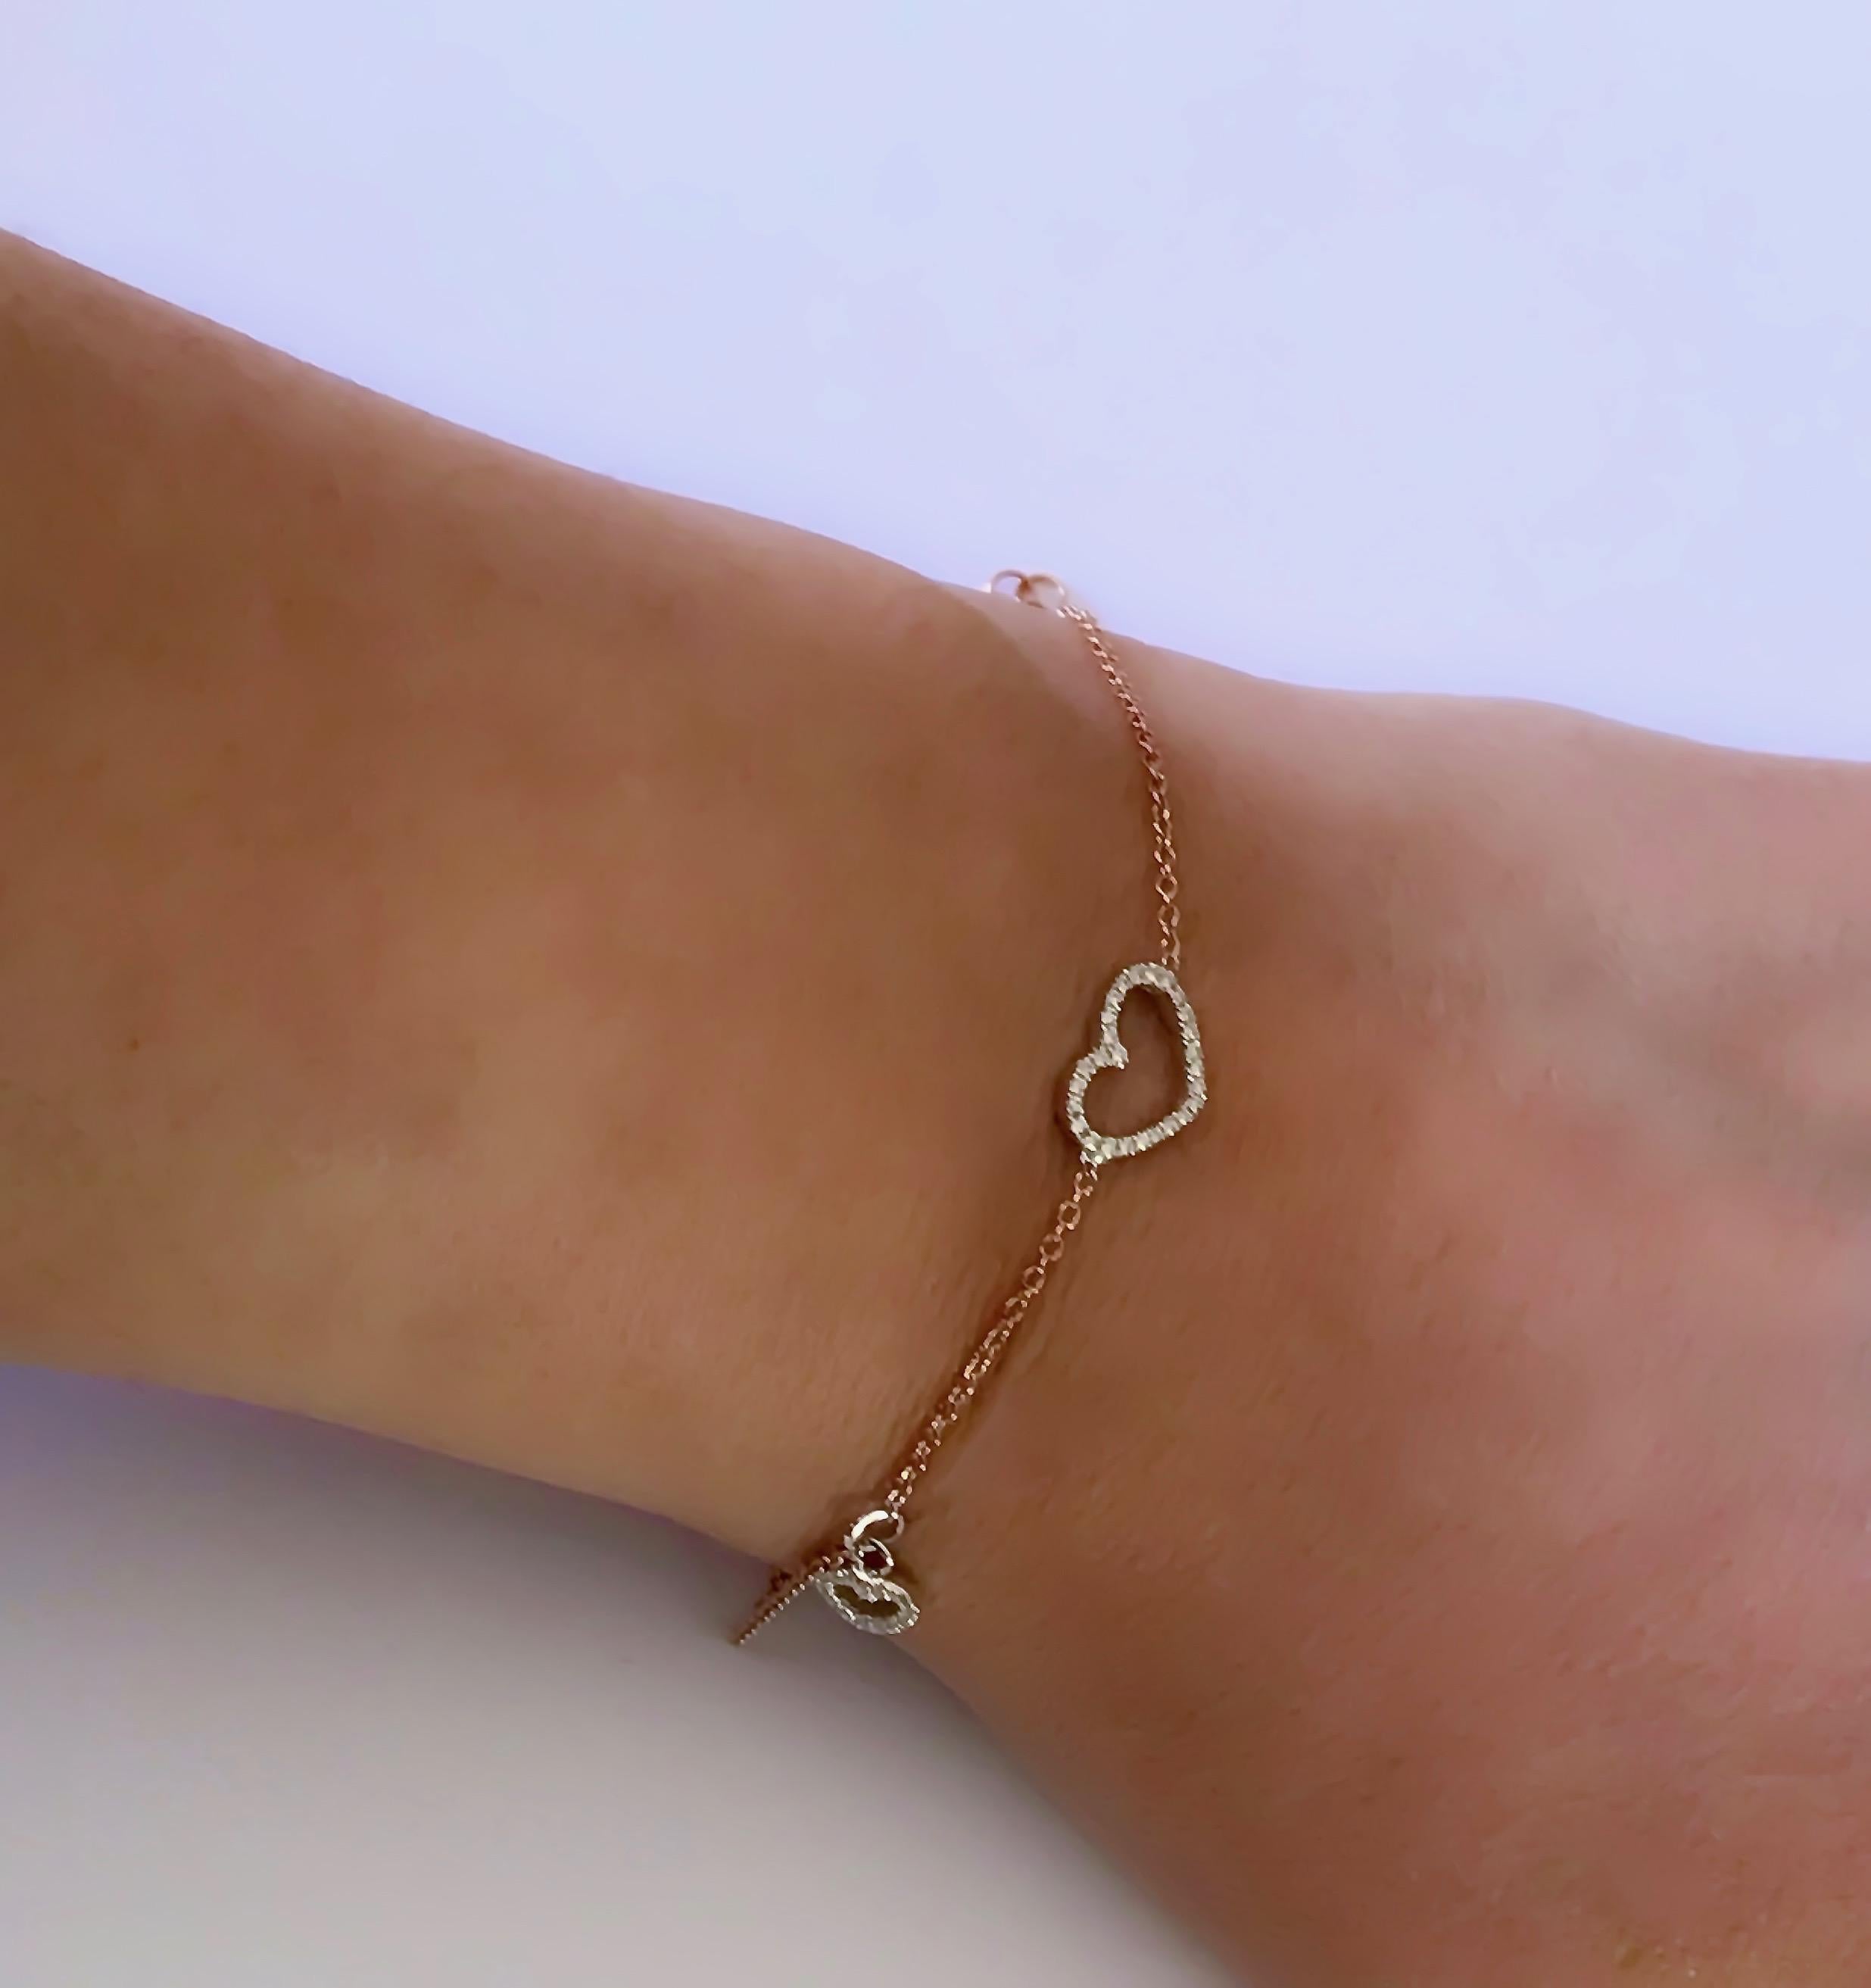 18 Karat Gold Charm Chain Diamond Heart Bracelet Bangle In New Condition For Sale In London, GB